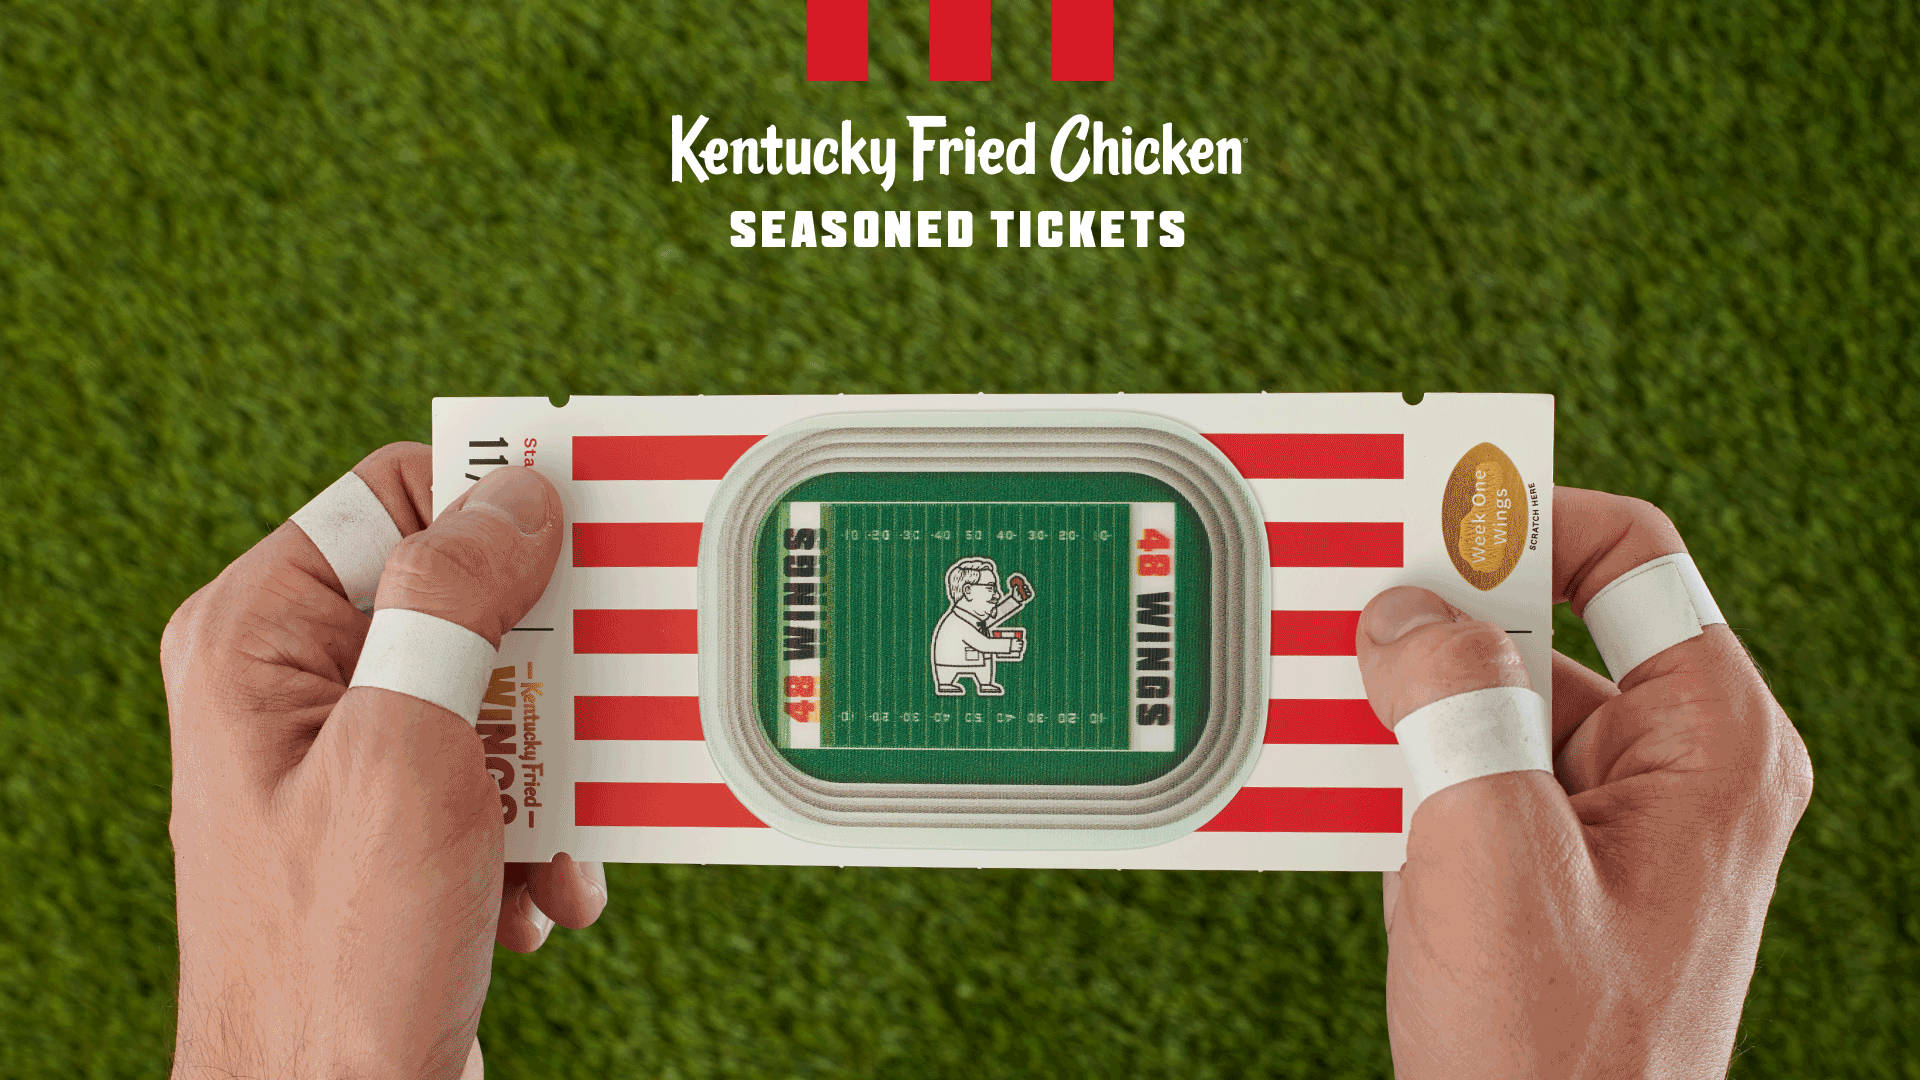 The KFC Seasoned Tickets are available for purchase starting today, Oct. 17, exclusively through Stubhub.